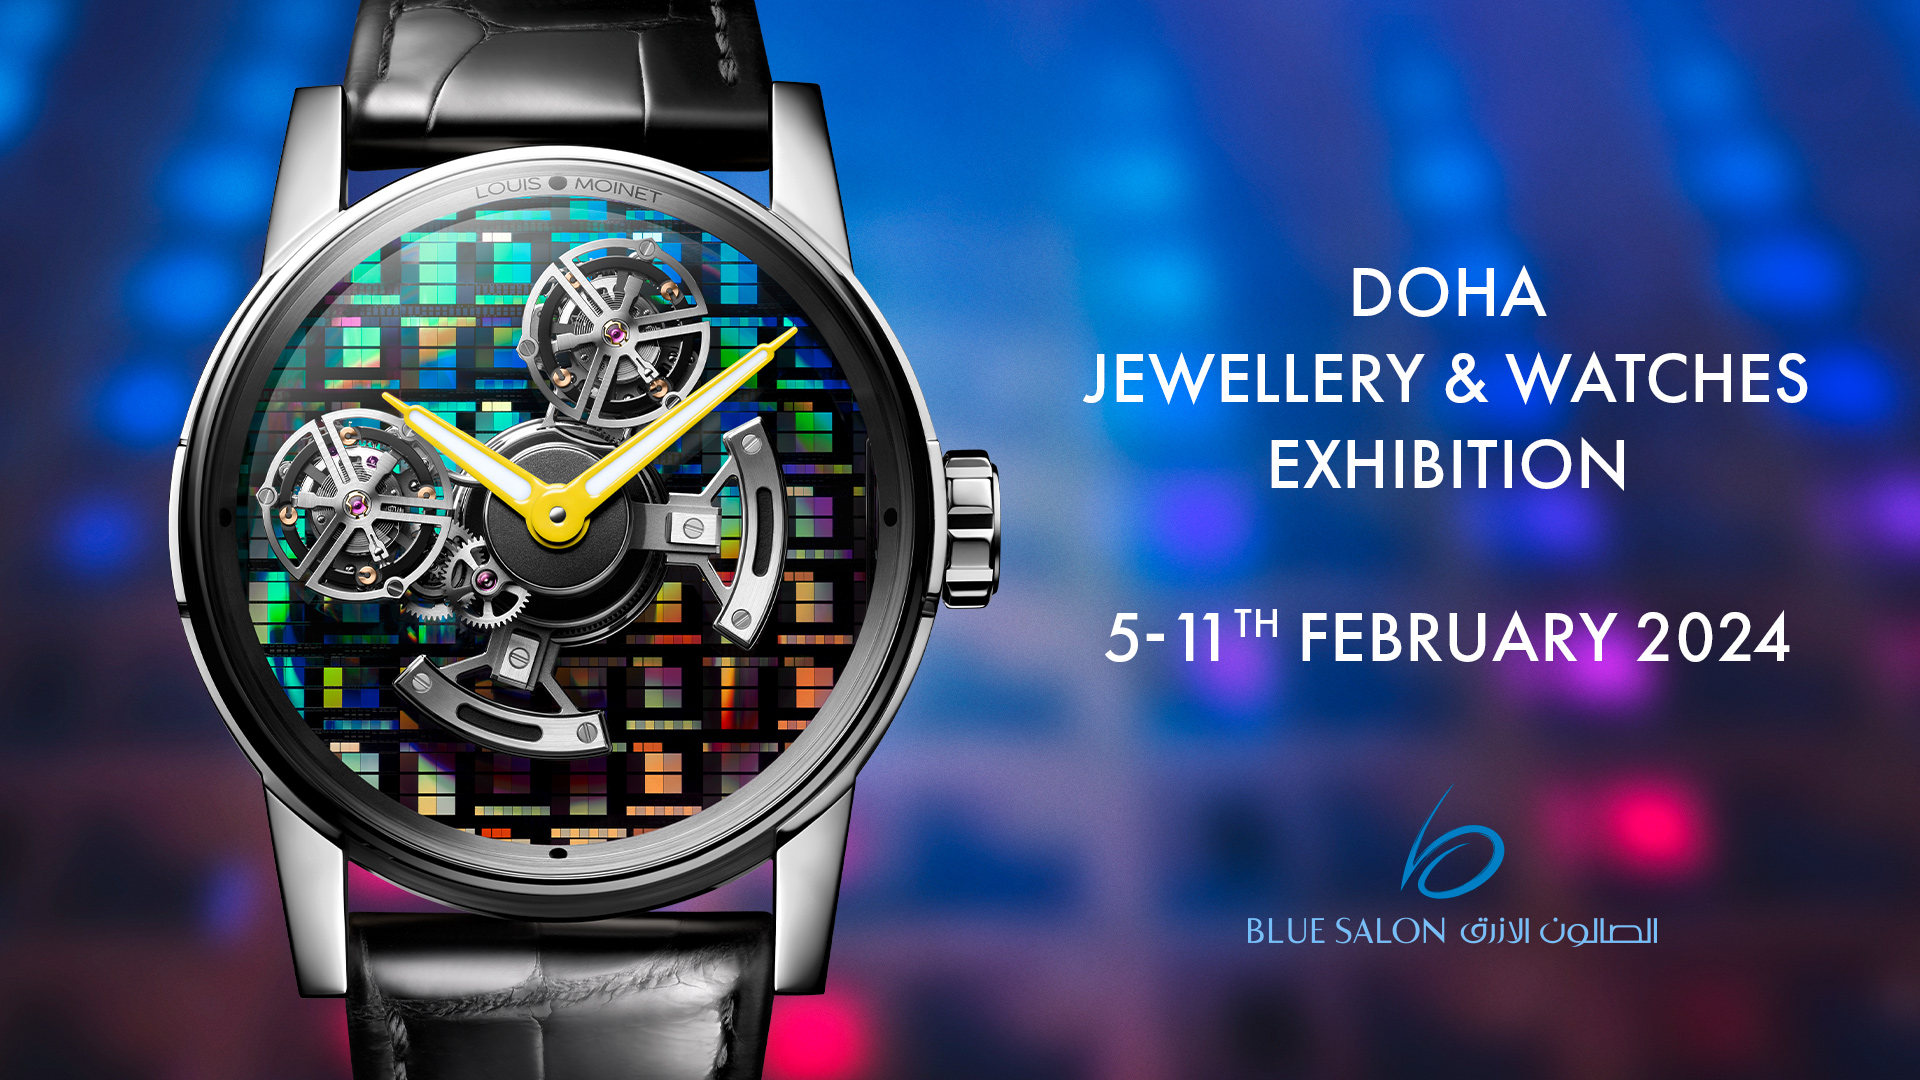 Louis Moinet is ready to shine at Doha Jewellery and Watches Exhibition